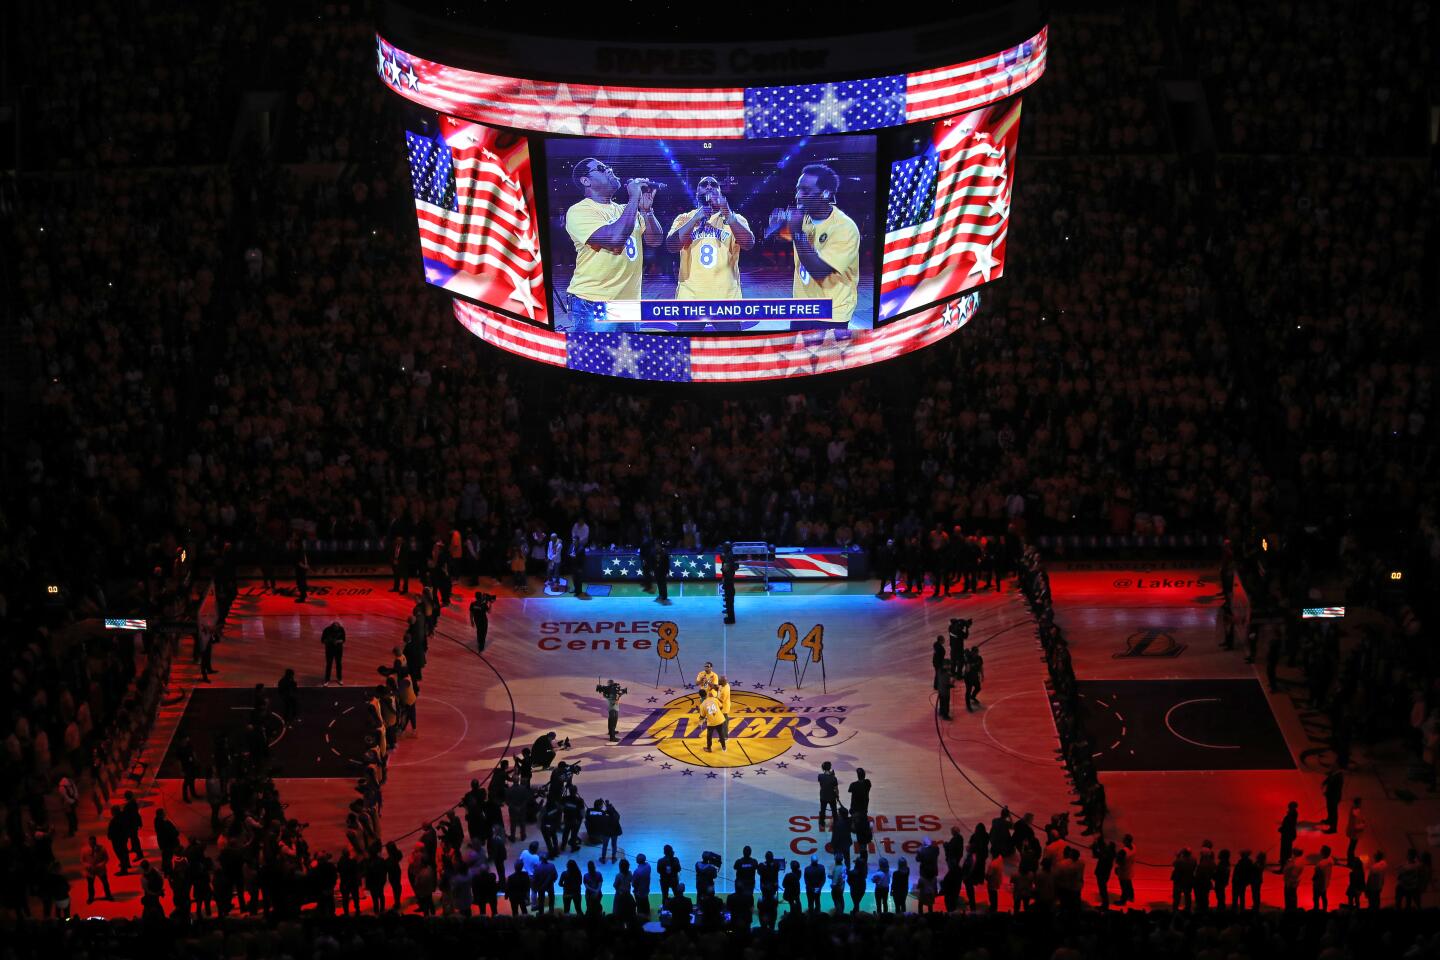 Boys to Men sing the national anthem before the start of the Lakers' game against them Portland Trail Blazers at Staples Center on Jan. 31, 2020.